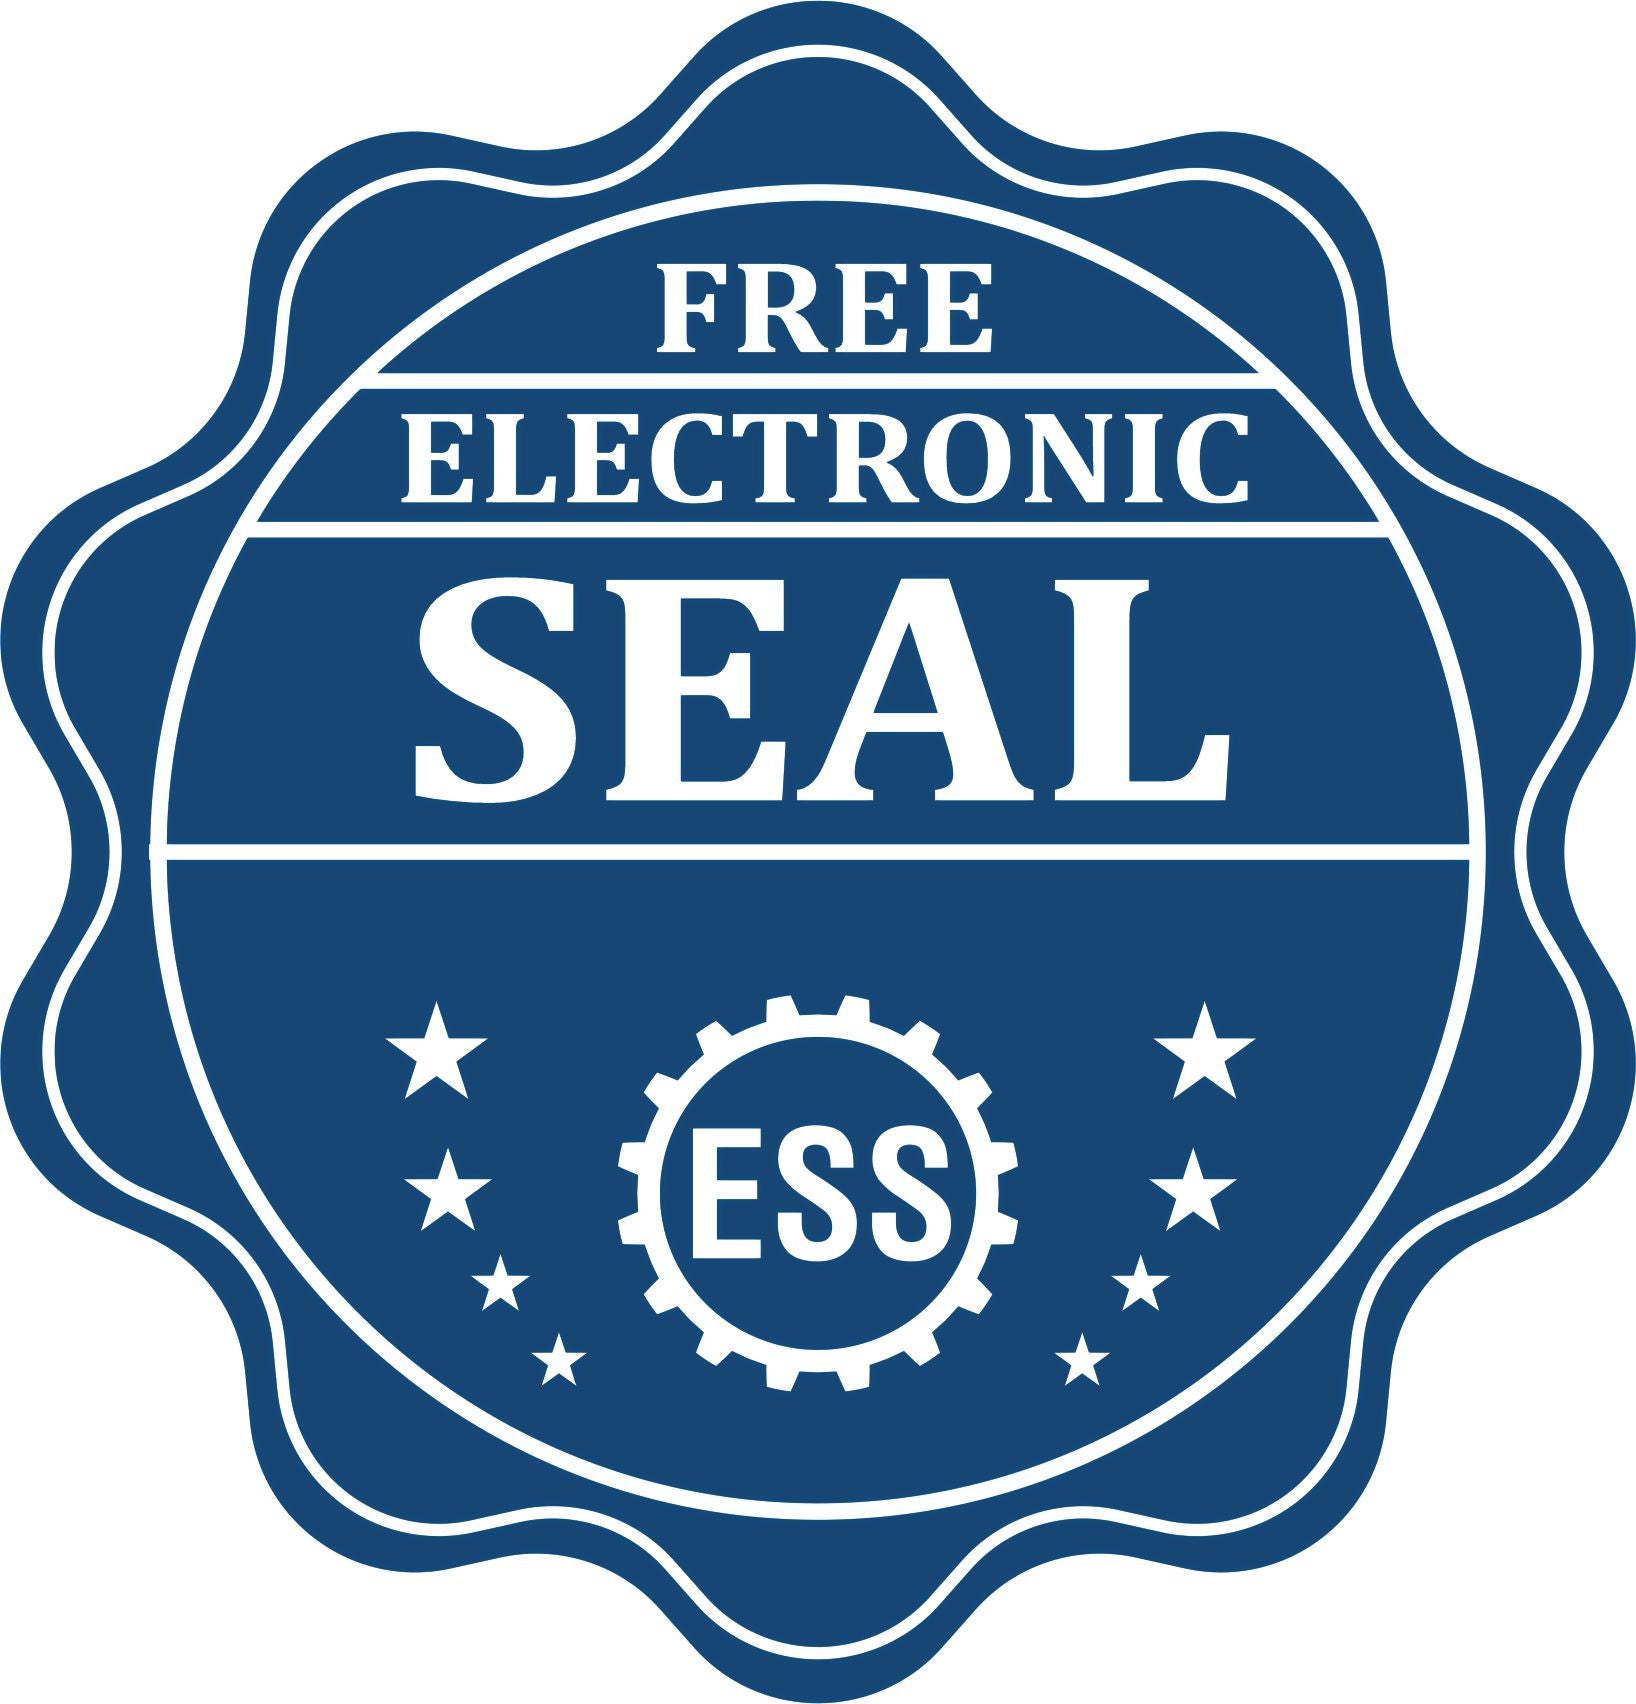 A badge showing a free electronic seal for the Slim Pre-Inked North Dakota Professional Engineer Seal Stamp with stars and the ESS gear on the emblem.